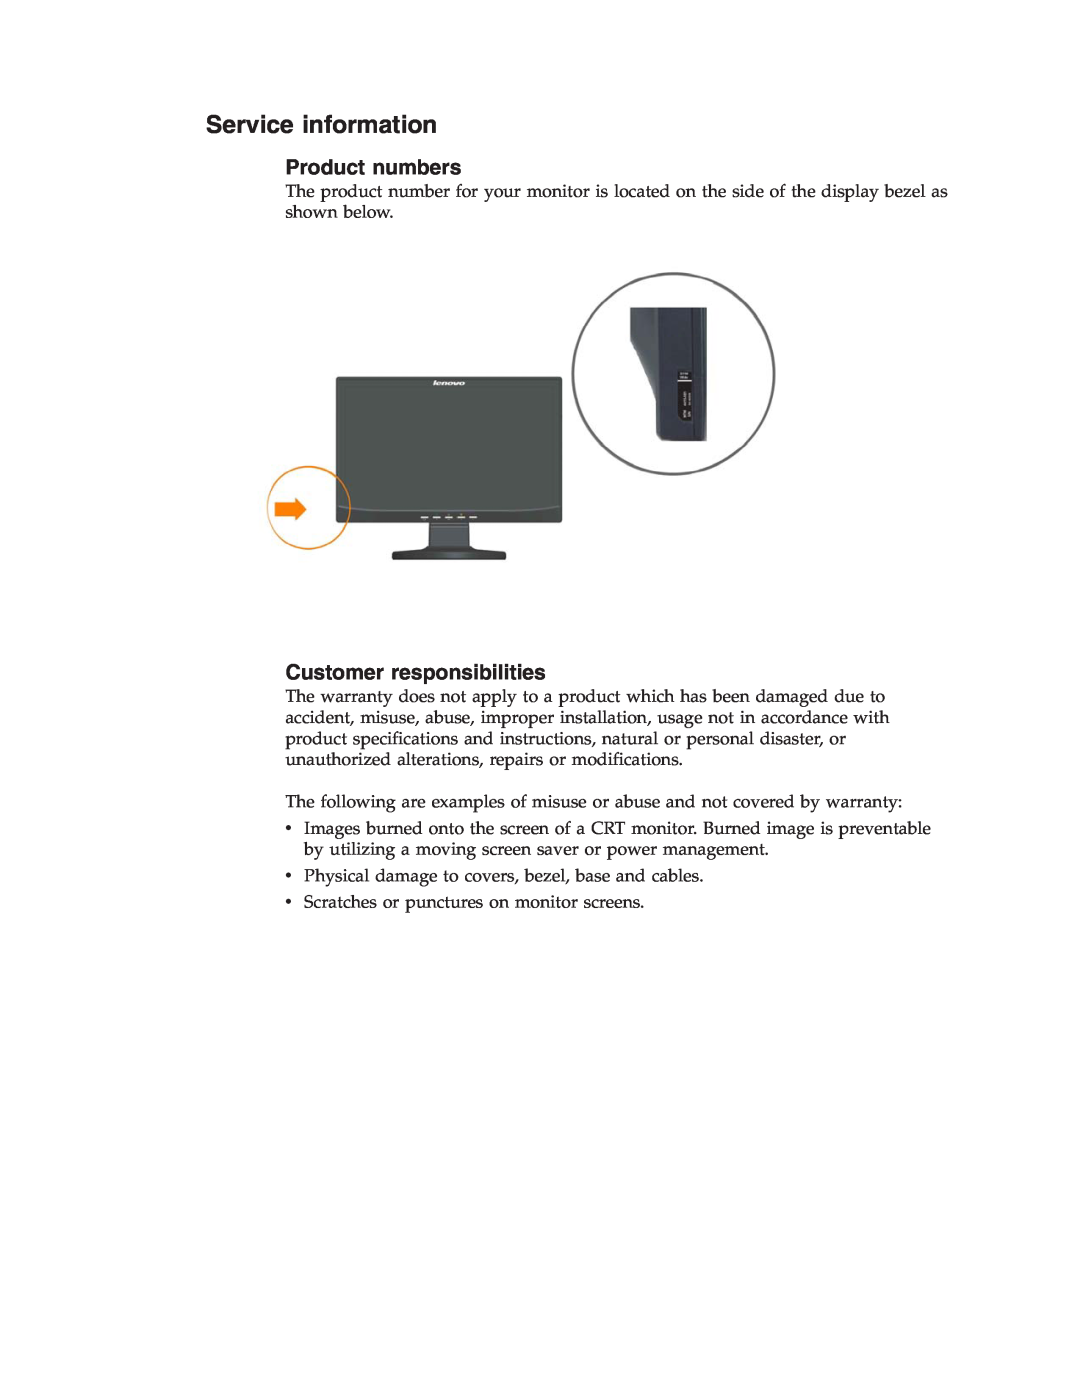 Lenovo 4415-AB1 manual Service information, Product numbers, Customer responsibilities 